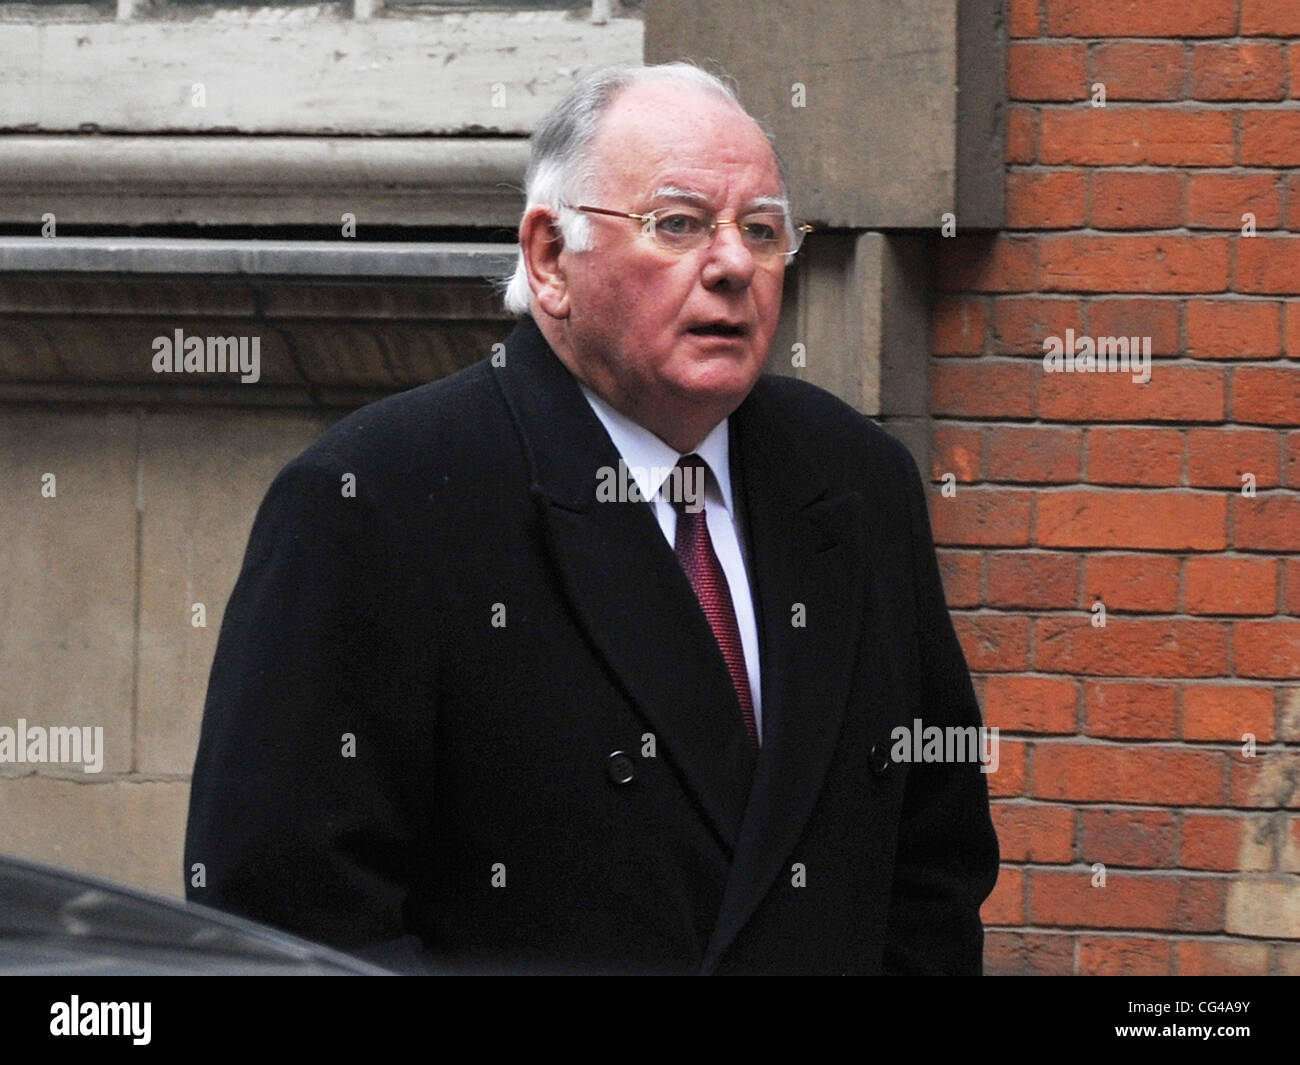 Former Speaker of the House of Commons Michael Martin out and about in Westminster. London, England - 26.01.11 Stock Photo